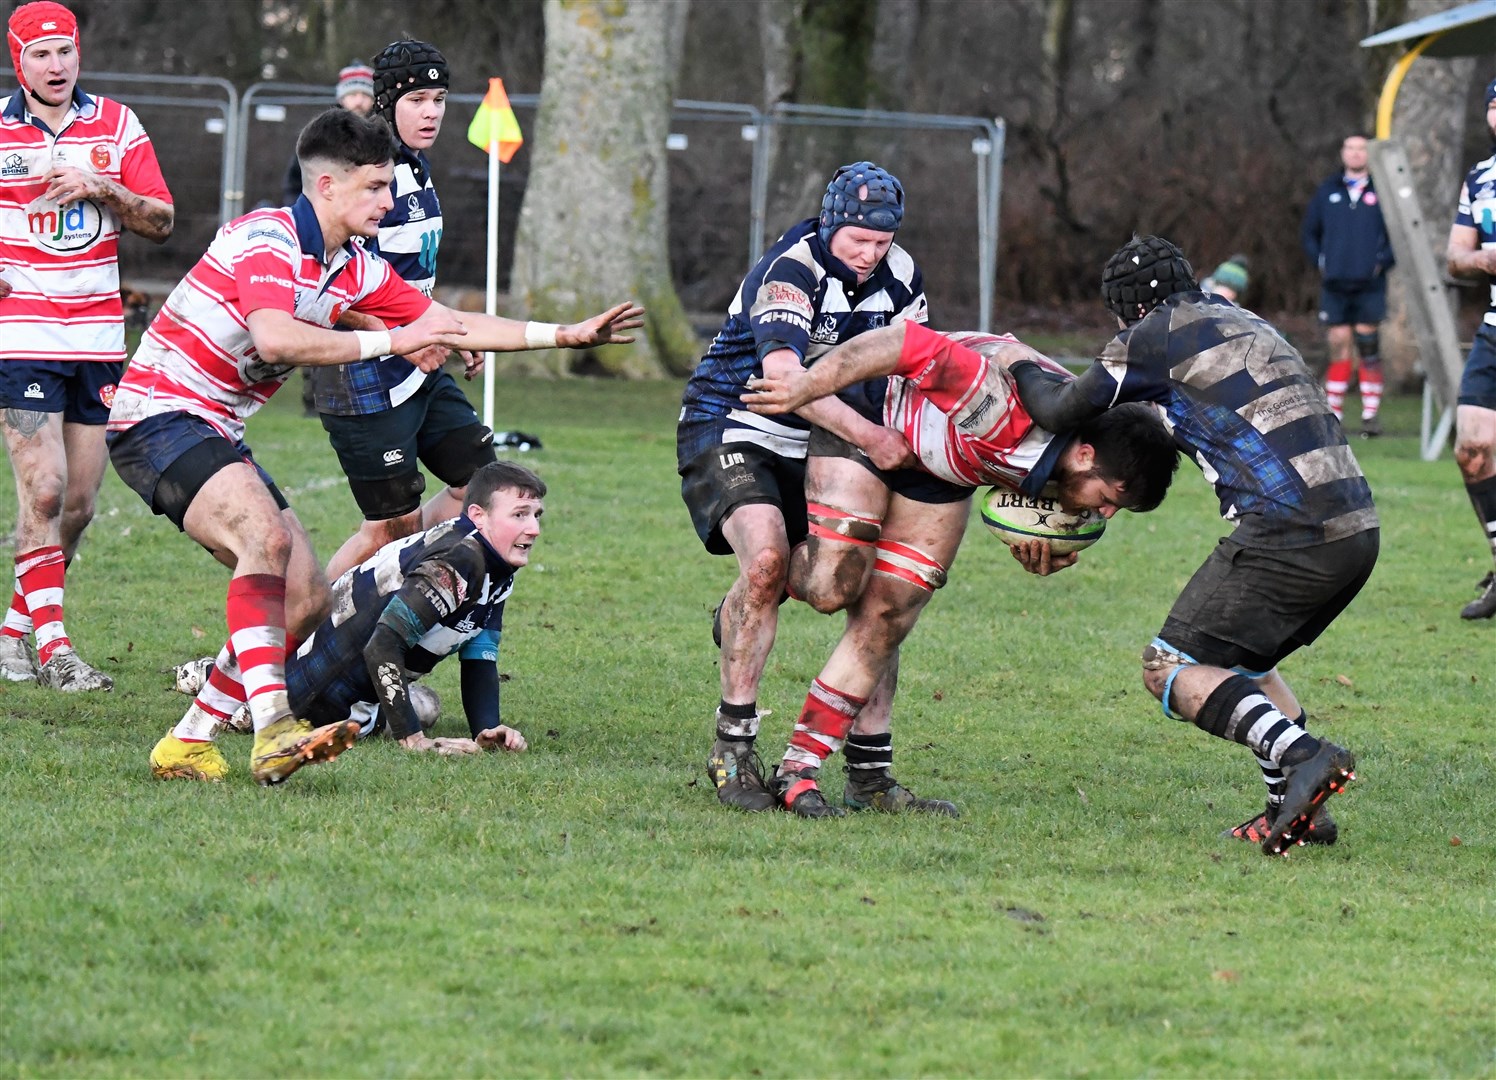 Neil Alexander keeps driving through tackle. Connor Cameron and Rory Millar arriving. Picture by James Officer